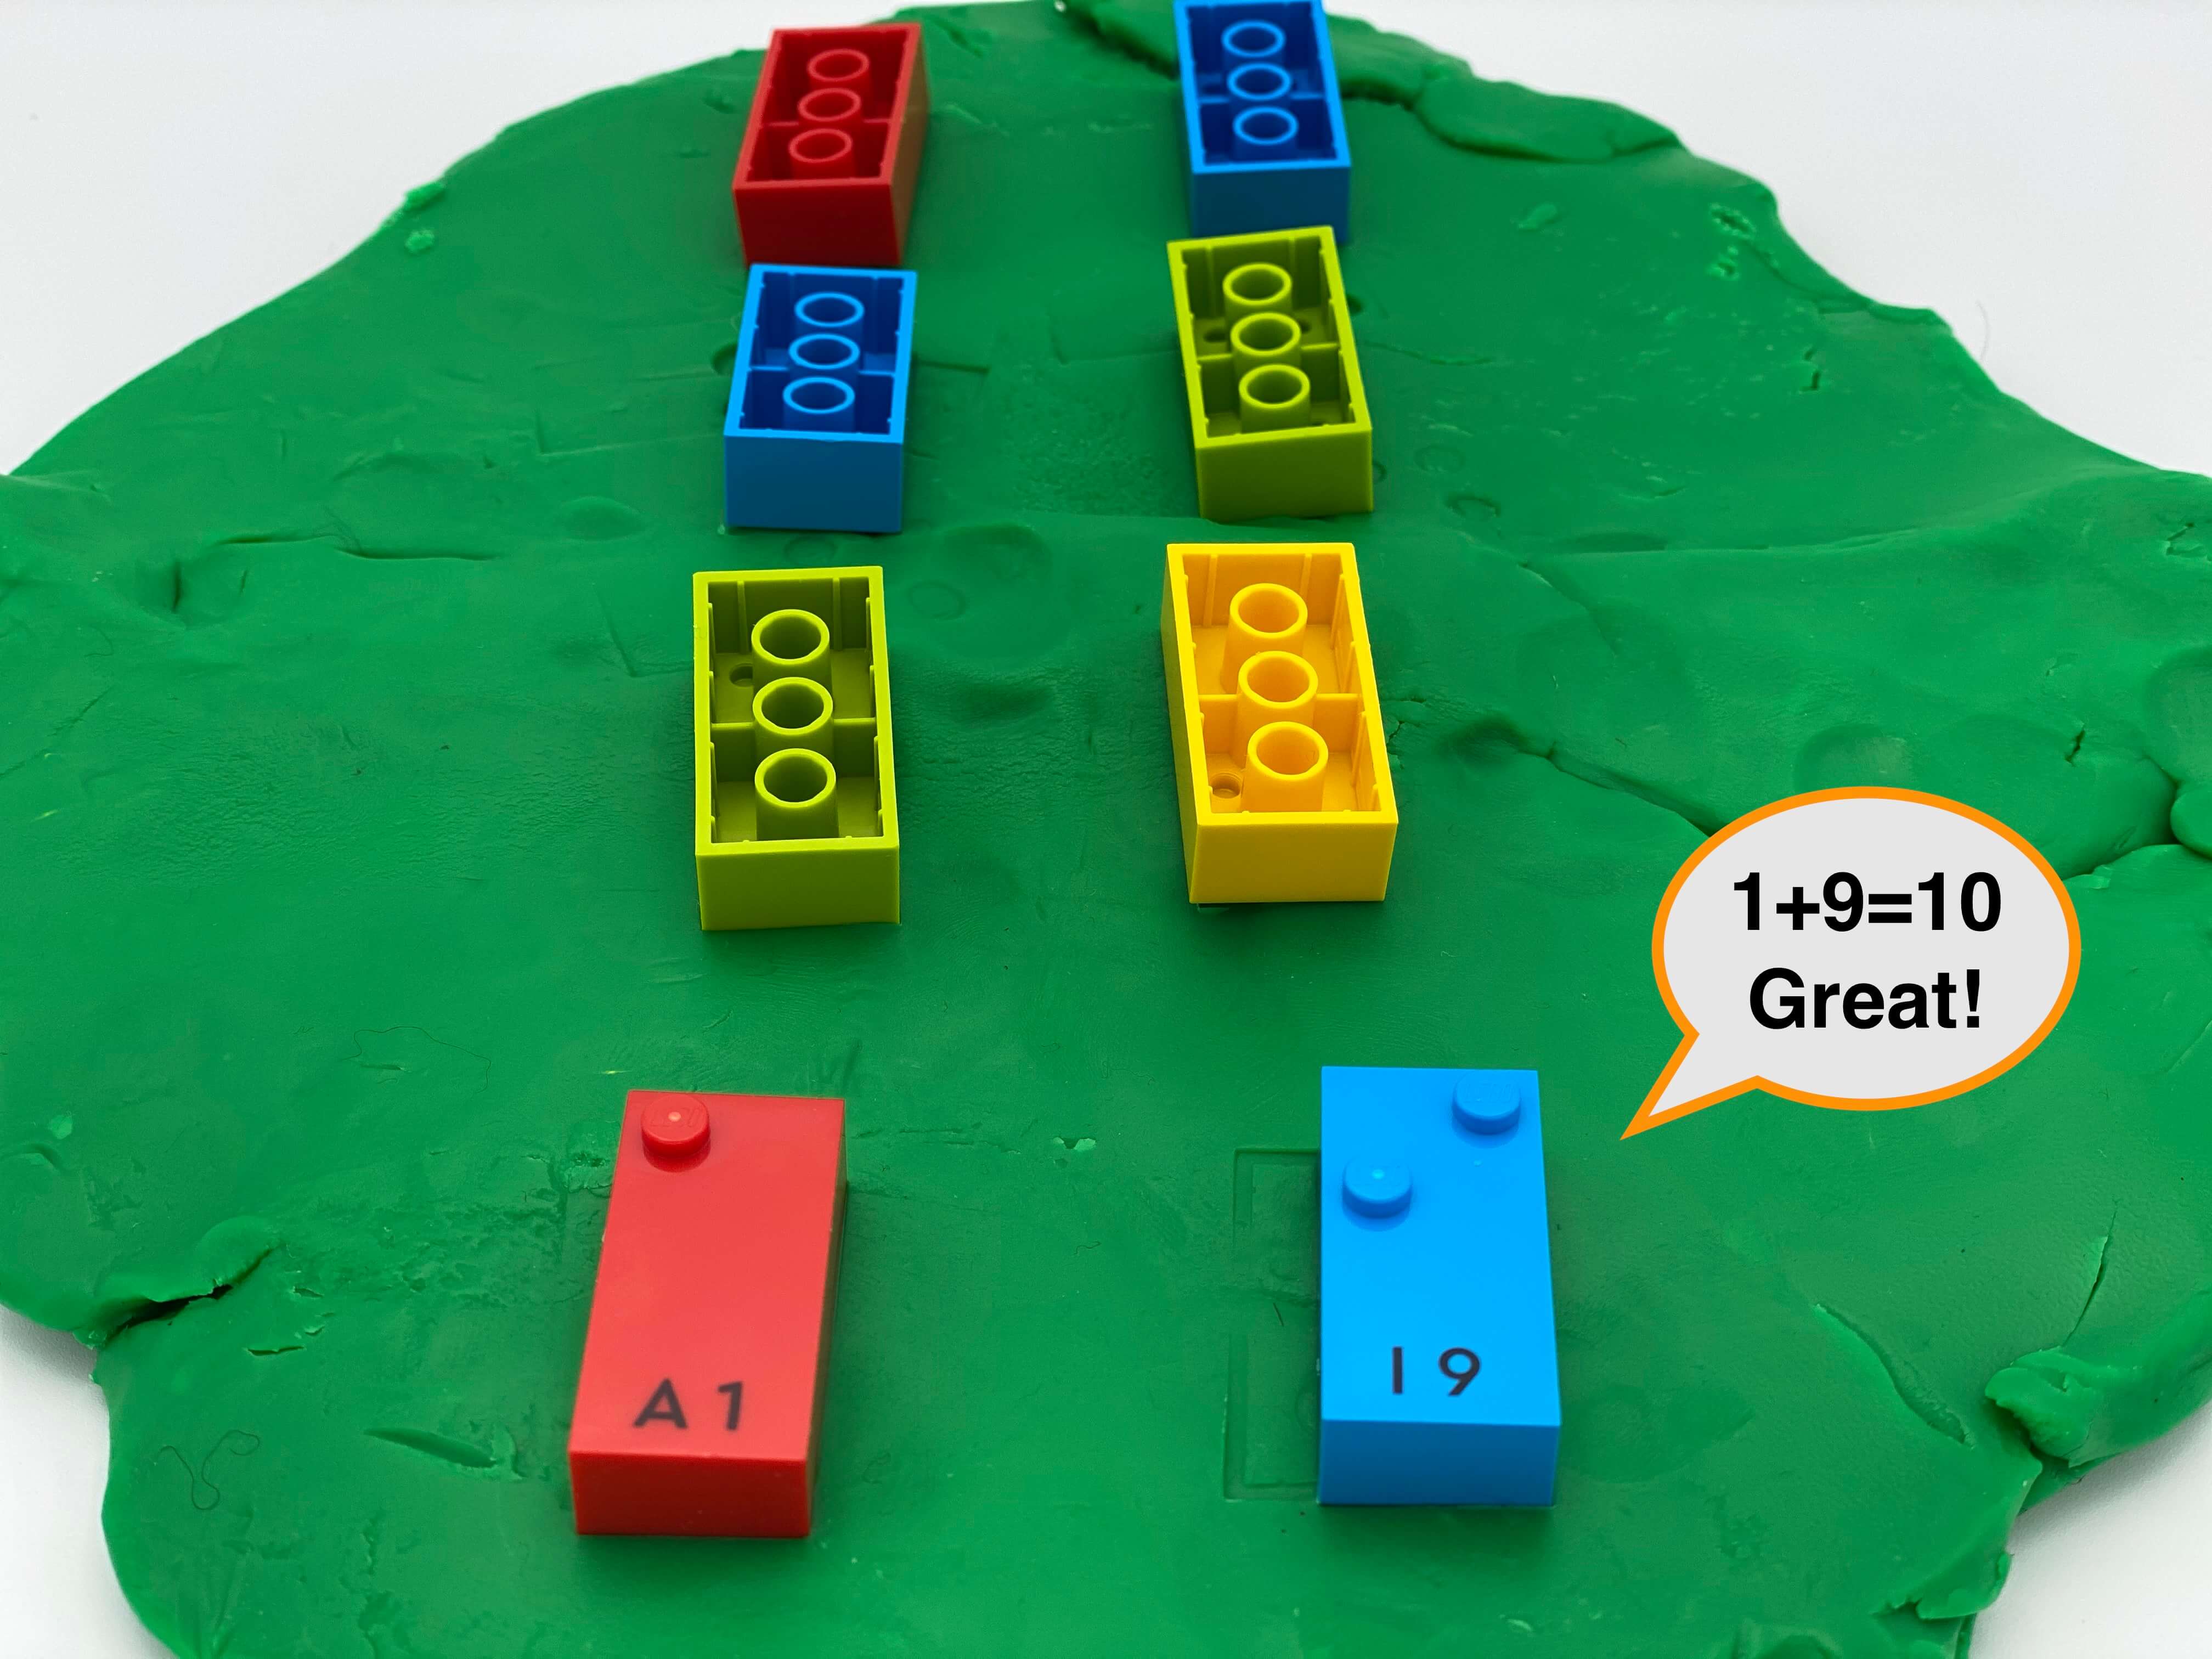 A disc of play dough with 8 bricks: 6 upside-down, 2 right-side up showing number 1 and 9.A speech bubble says 1+9=10 Great!.